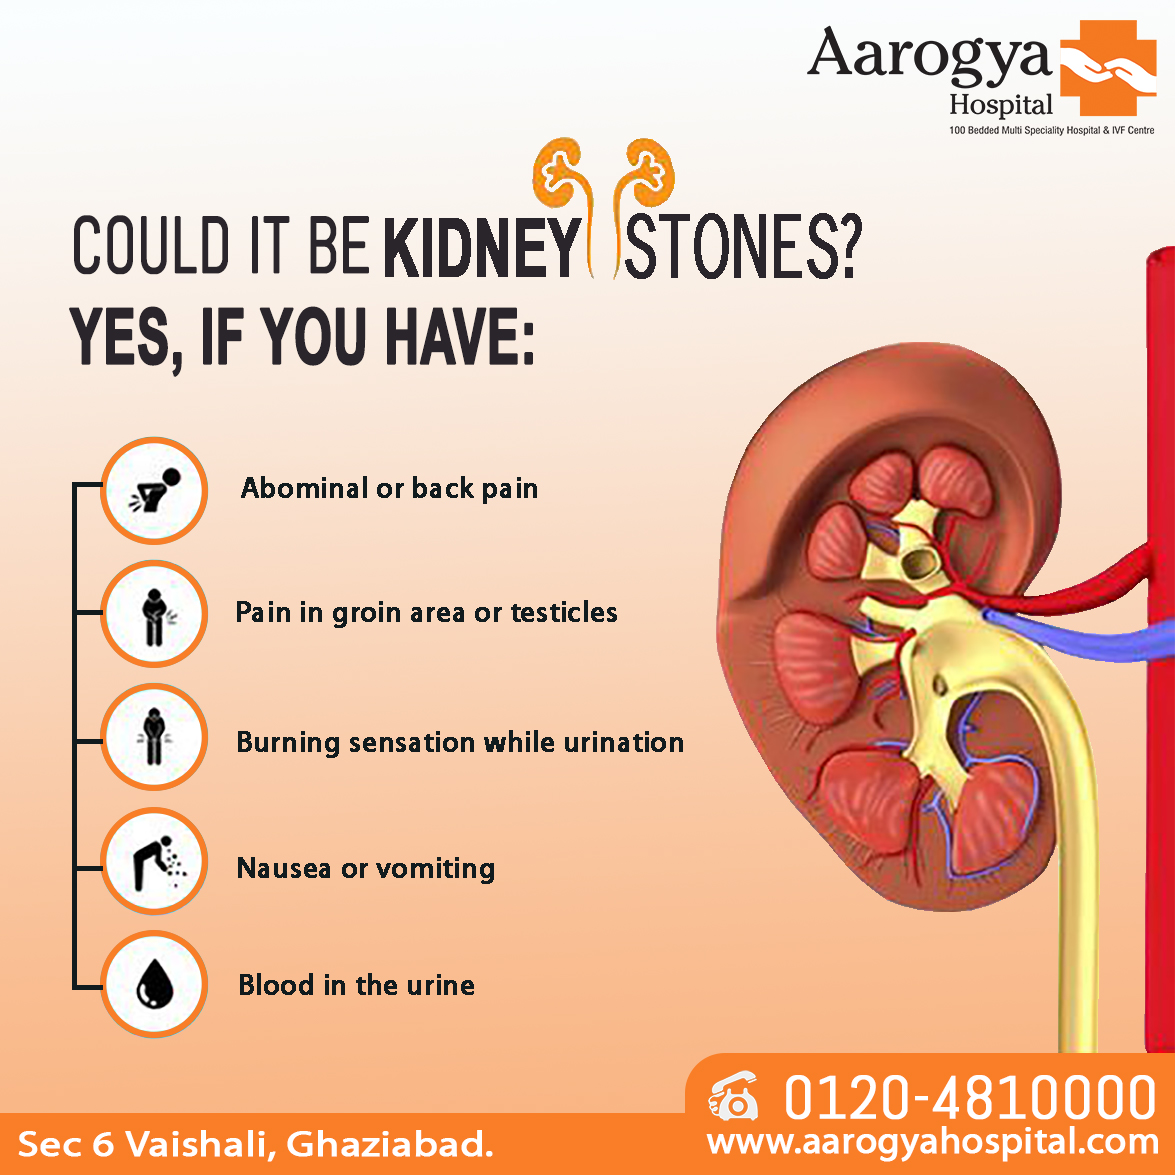 Aarogya Hospital on Twitter: "Kidney stones that block the urinary tract or  cause severe pain or dehydration may require a hospital visit. Here are  seven signs and symptoms that you may have